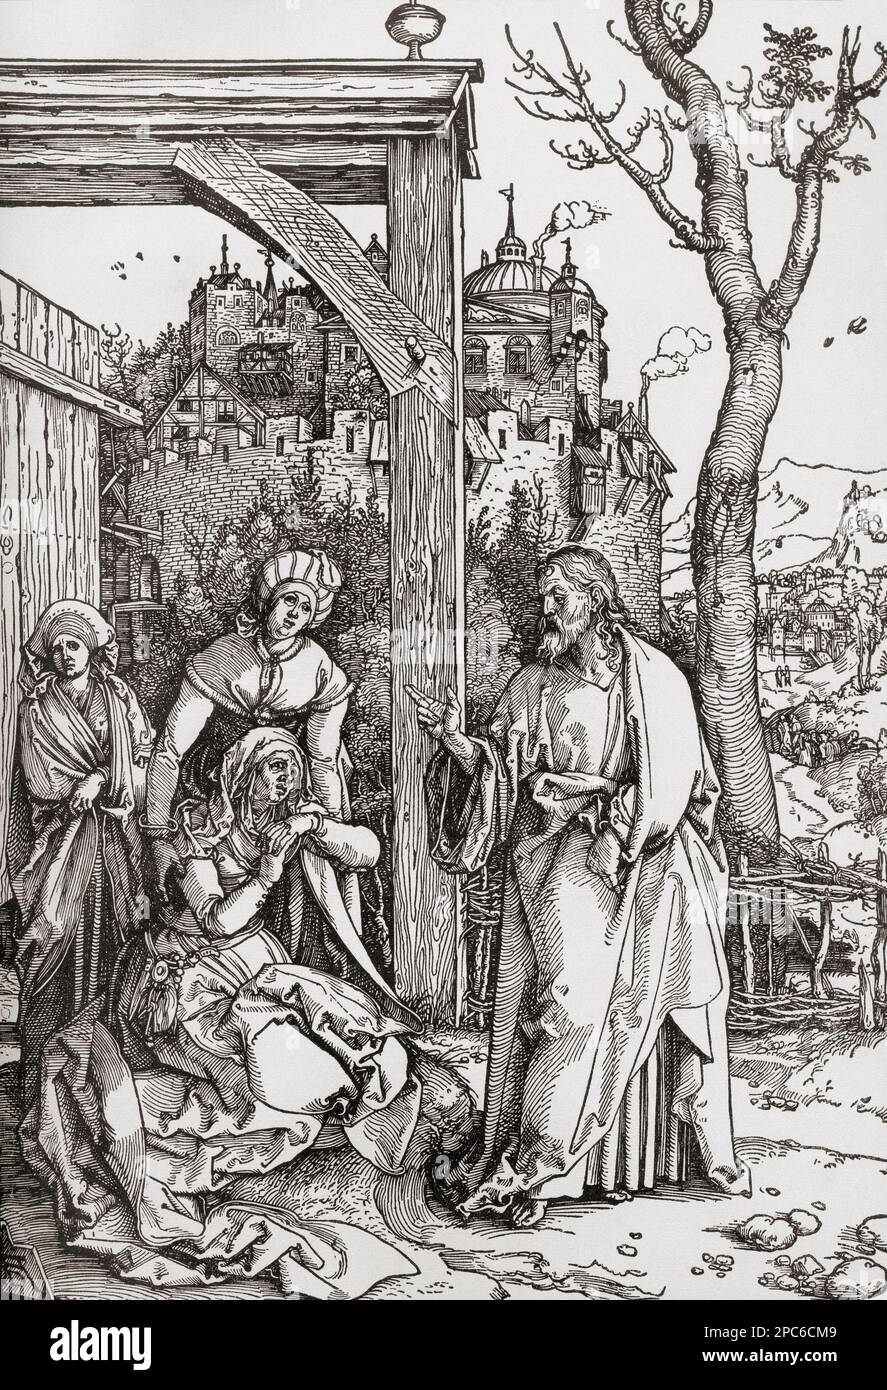 Christ Taking Leave from His Mother, after the work by Albrecht Dürer, 1471 – 1528, sometimes spelled in English as Durer.  German painter, printmaker, and theorist of the German Renaissance.  From Albrecht Dürer, Sein Leben und eine Auswahl seiner Werke or His life and a selection of his works, published 1928. Stock Photo